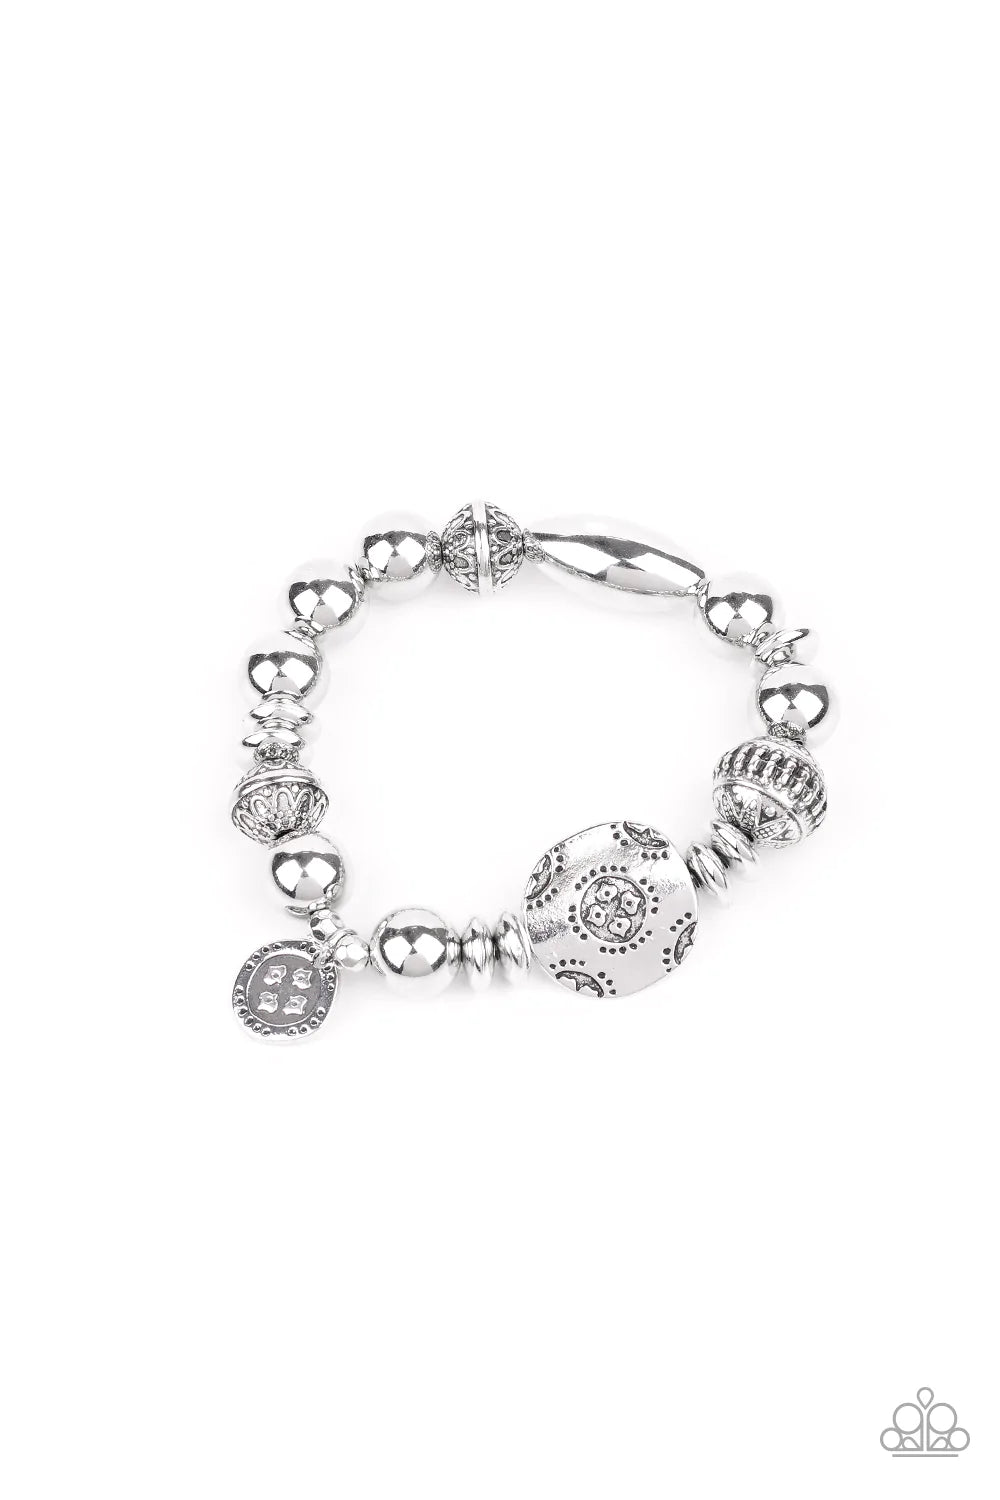 Paparazzi Accessories  - Aesthetic Appeal #B723  Drawer 5/2 - Silver Bracelet